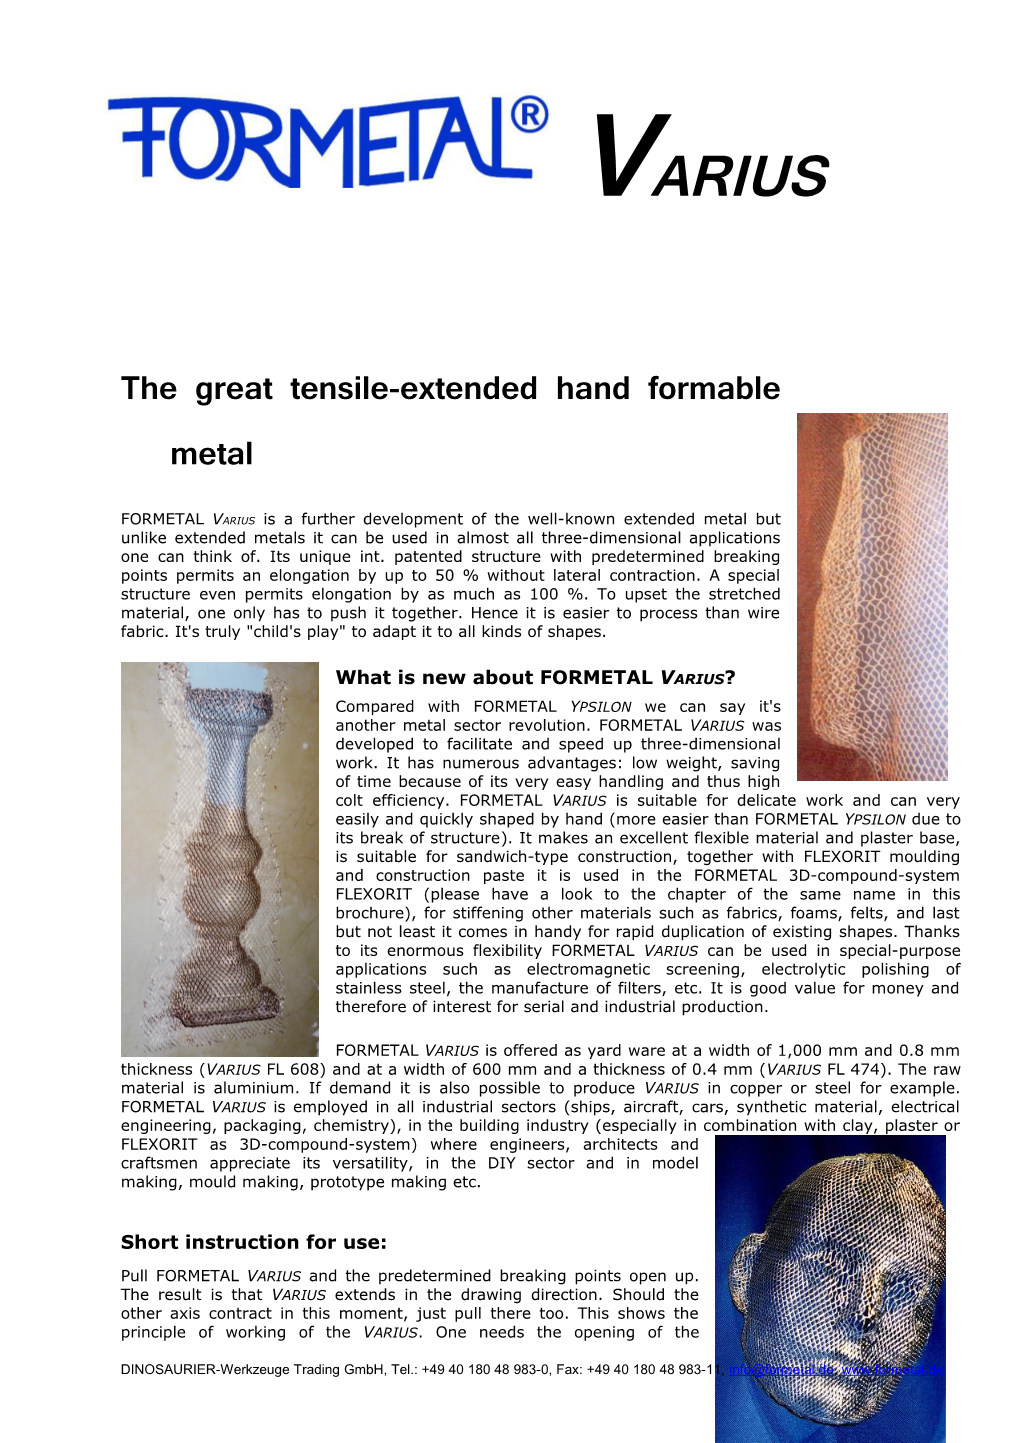 The Great Tensile-Extended Handformablemetal